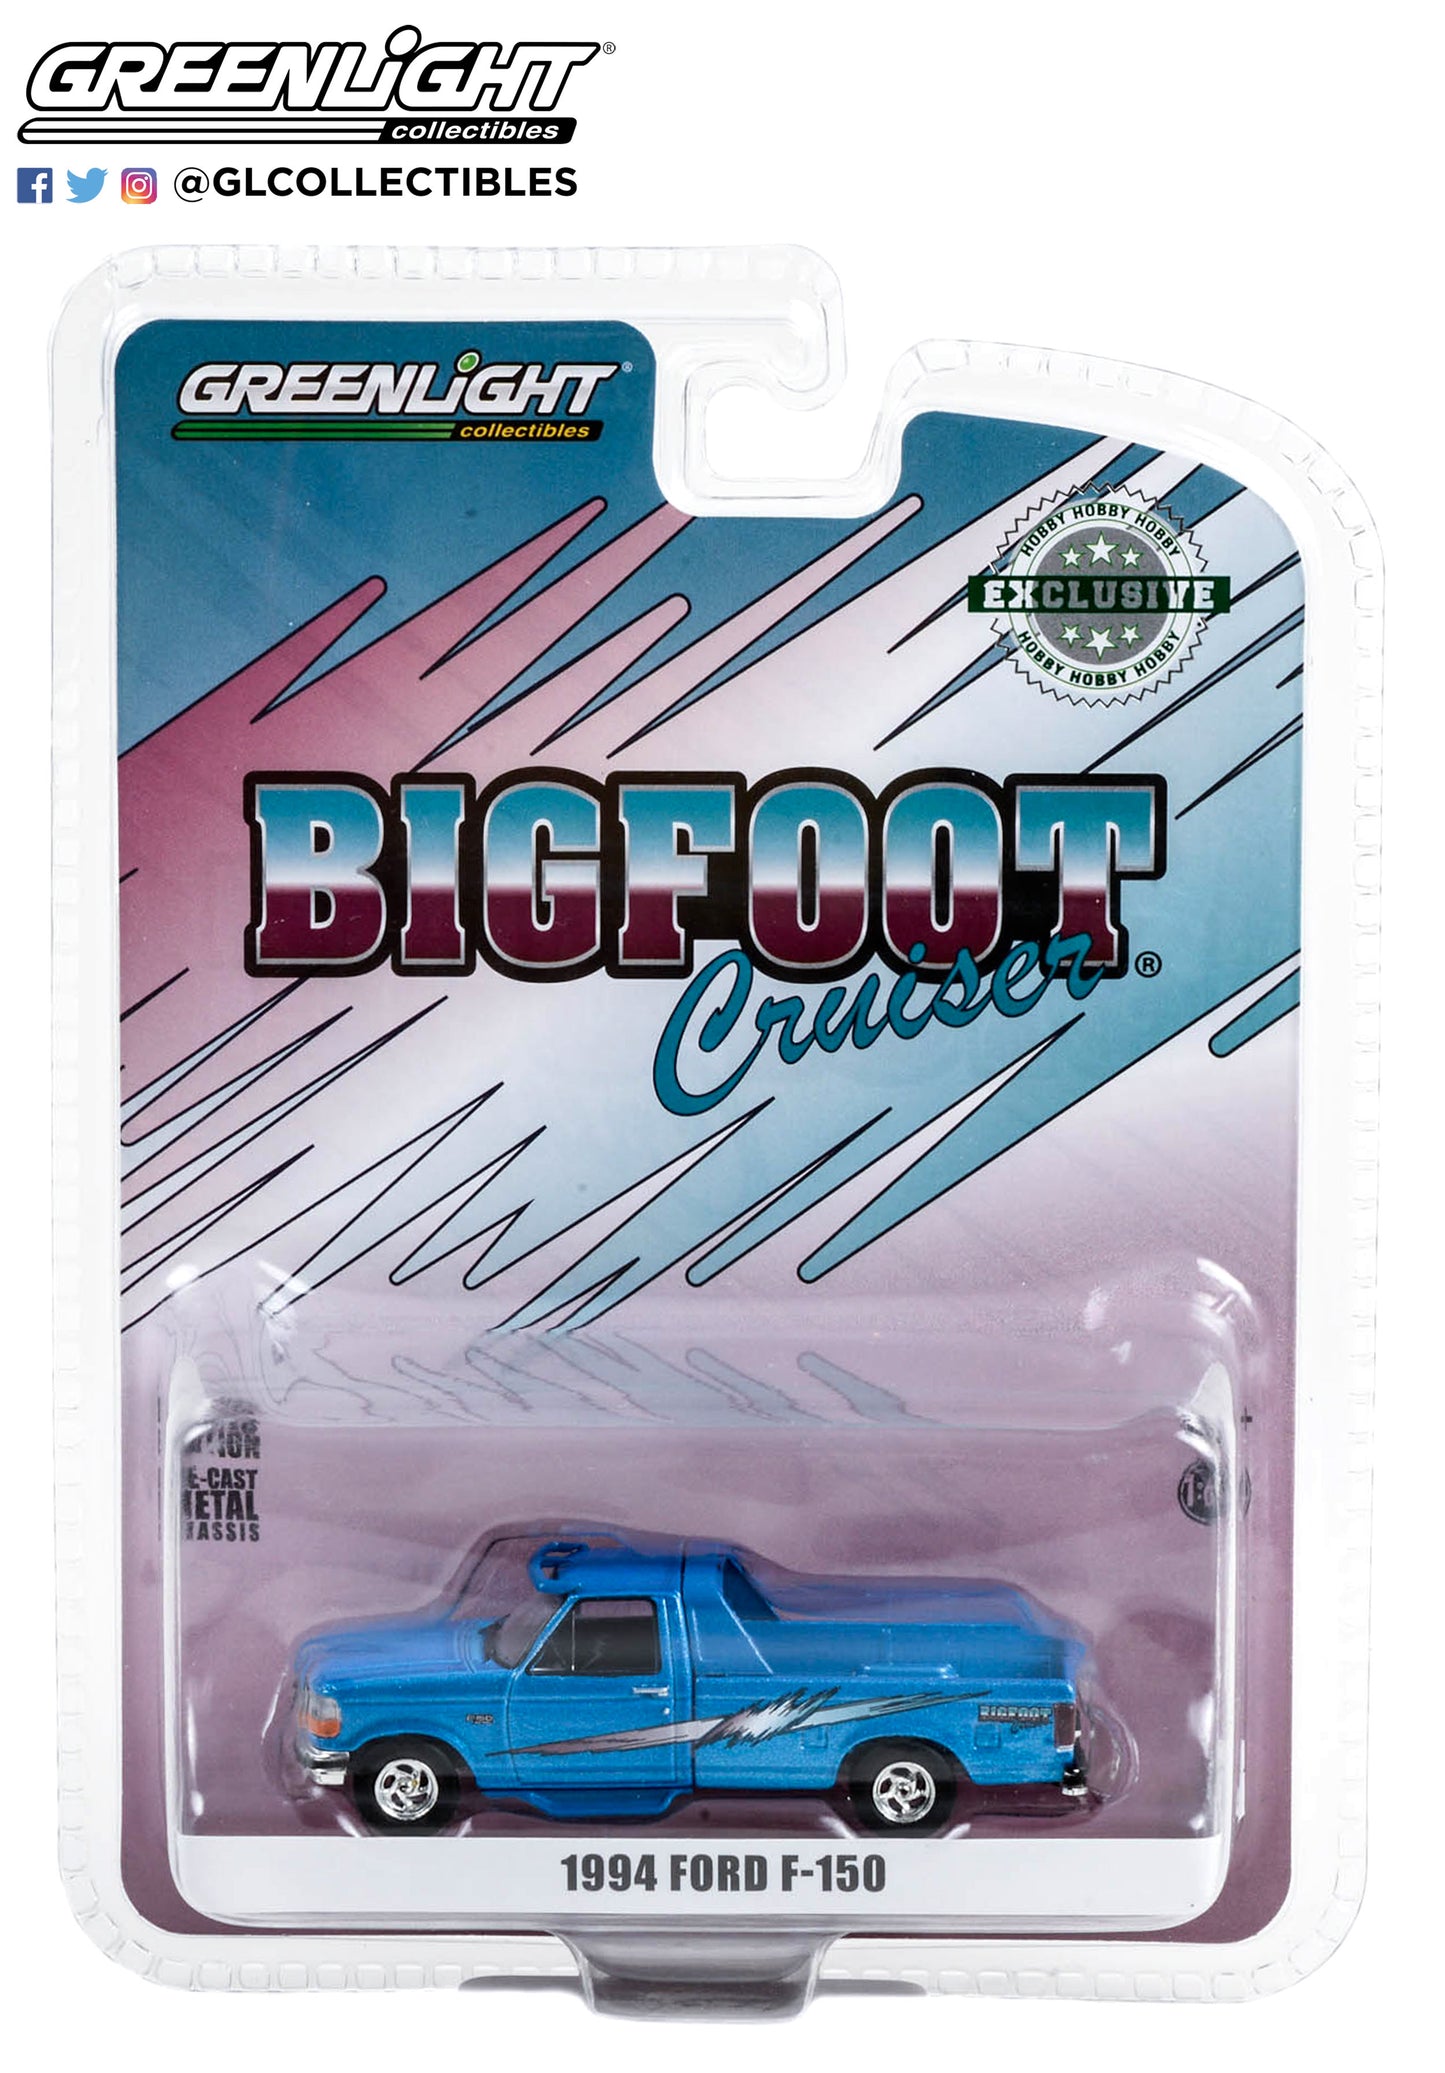 GreenLight 1:64 1994 Ford F-150 - Bigfoot Cruiser #2 - Ford, Scherer Truck Equipment and Bigfoot 4x4 Collaboration (Hobby Exclusive) 30376